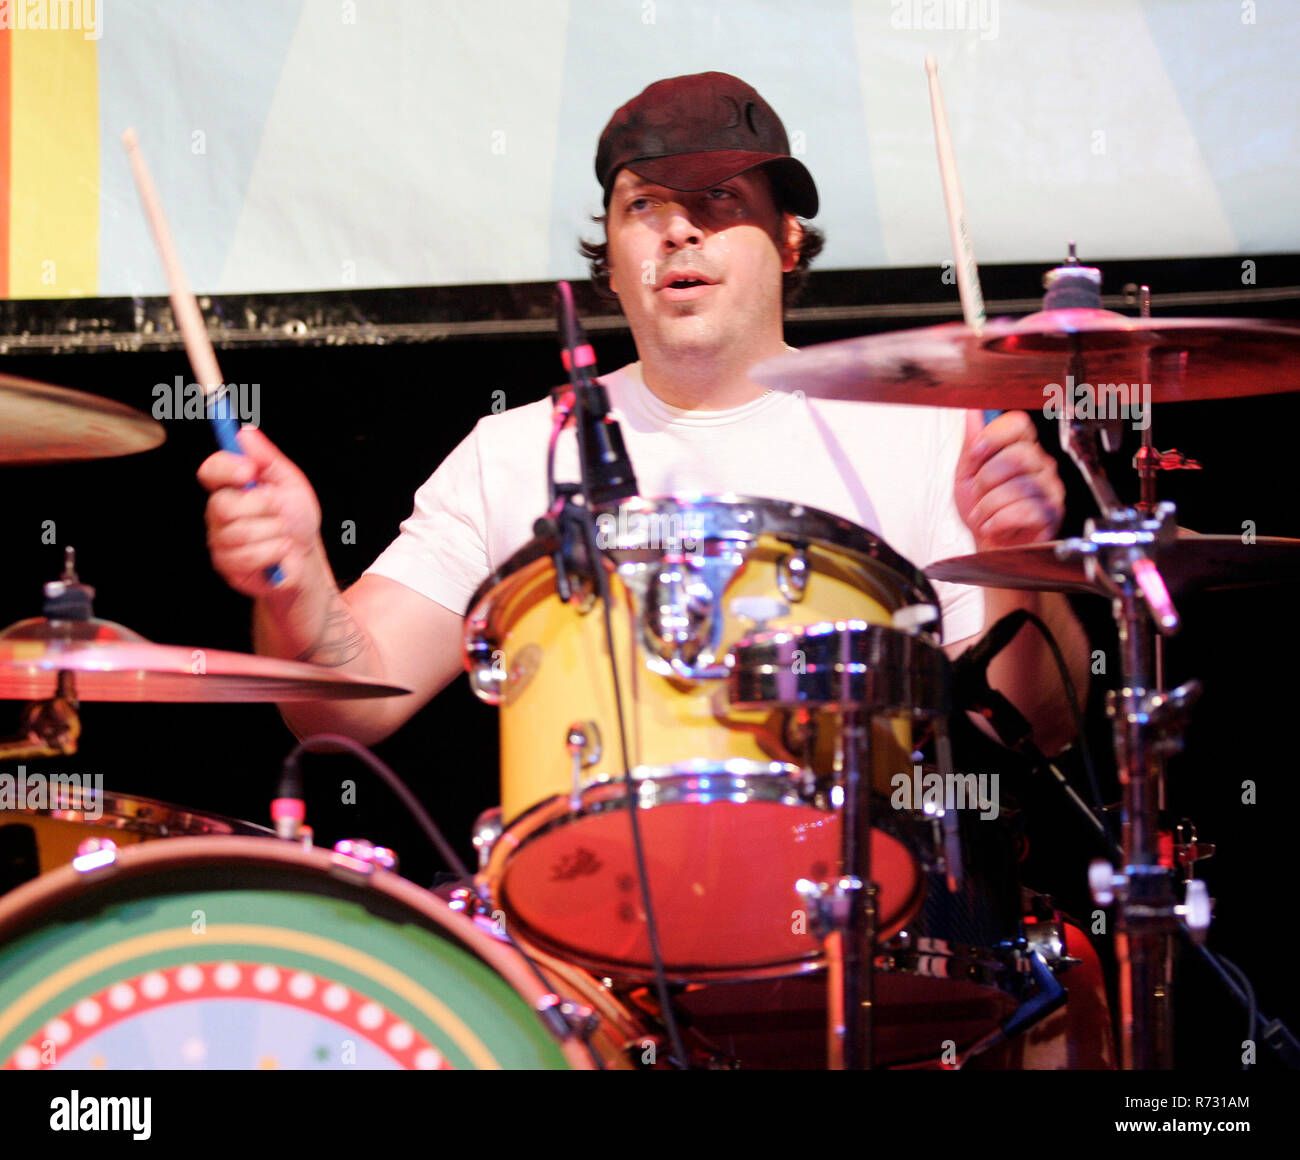 Vinnie Fiorello with Less Than Jake performs in concert at Club Revolution, in Ft. Lauderdale Florida on July 23, 2007. Stock Photo